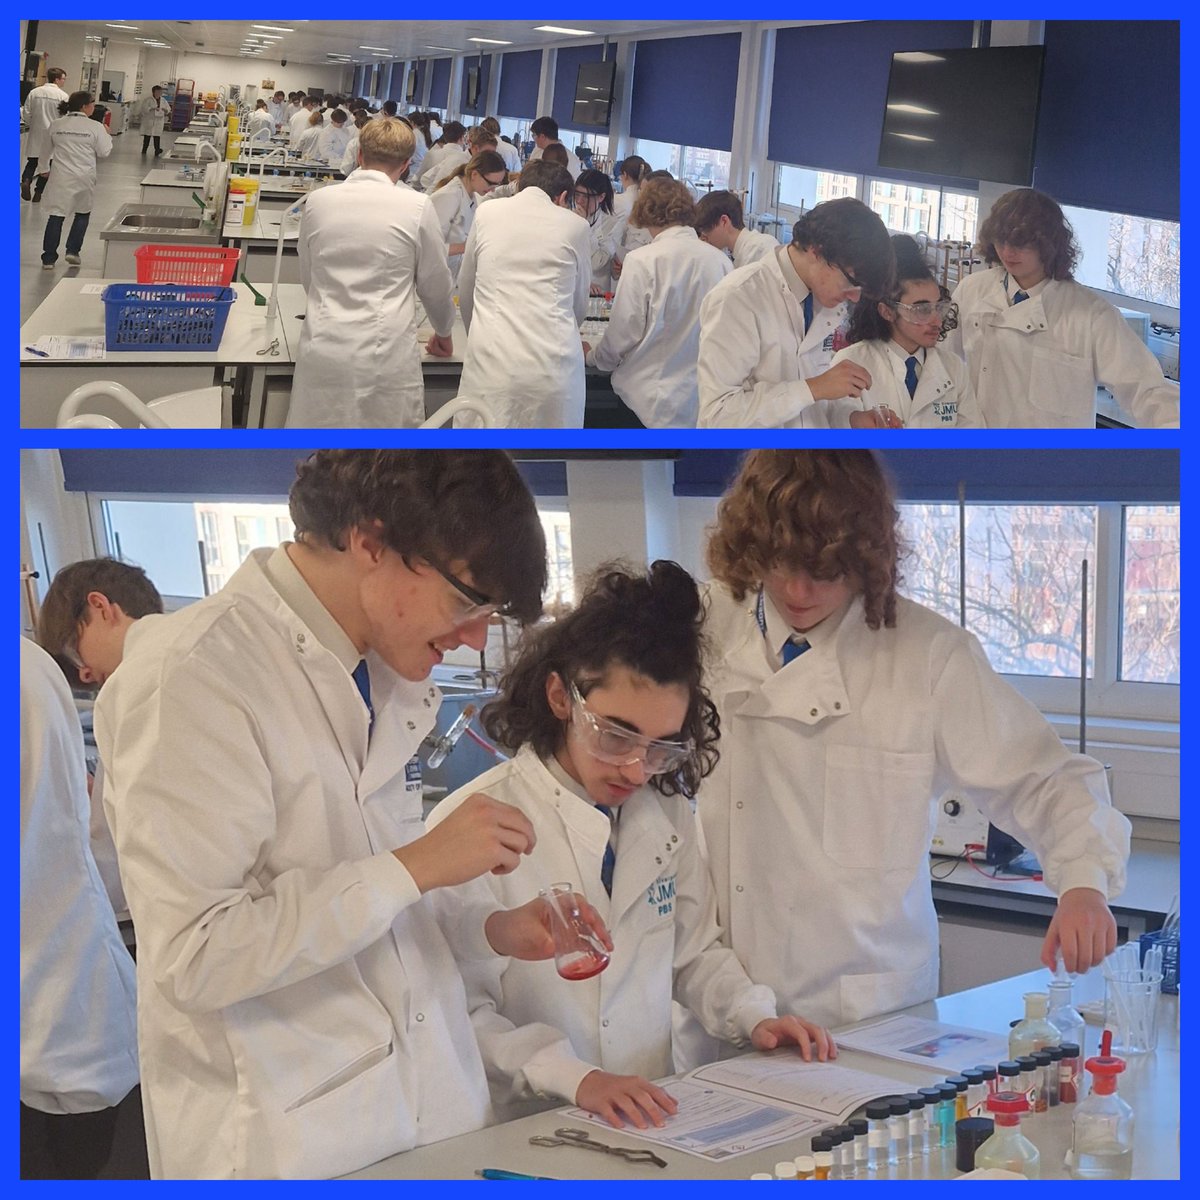 Revising 'all things ionic' at JMU. 32 yr11 students had a great day using the labs to revise practically and the lecture halls to revise theory and exam practice pt2
@LJMUAbsChem @Grange_School @ShapingFutures_